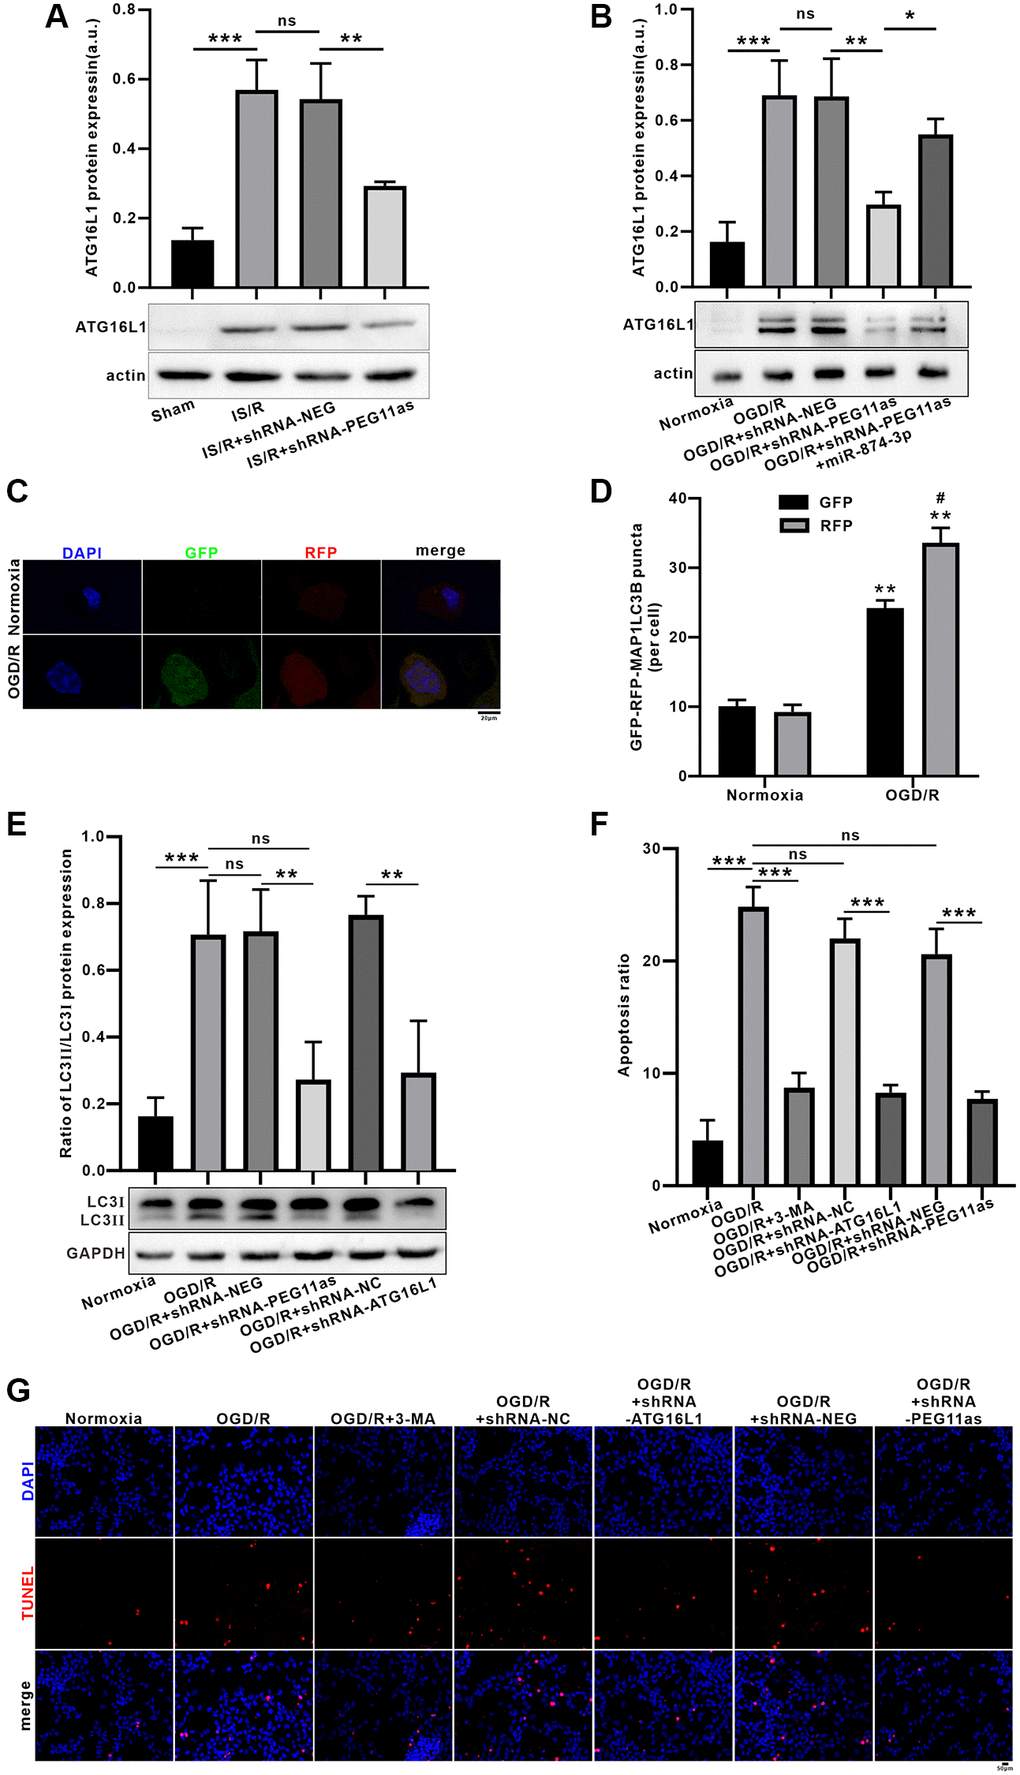 Inhibition of PEG11as alleviated OGD/R-induced apoptosis by ameliorating autophagic flux defects via miR-874-3p/ATG16L1 axis in N2a cells. (A) PEG11as silencing down-regulated ATG16L1 expression in tMCAO/R mice after transfection with sh-PEG11as. n = 6 animals/group. (B) PEG11as regulated ATG16L1 expression by sponging miR-874-3p. The cells were transfection with sh-PEG11as or co-treated with miR-874-3p inhibitor. 48 hours later, the cells were exposed to OGD 4 hours and 24 hours of Reperfusion in N2a cells. n = 3. (C, D) Knockdown of ATG16L1 ameliorate OGD/R-induced autophagic flux defects. (E) LC3-II/LC3-I ratio and p62 level were determined by western blot after transfection of ATG16L1 siRNA in N2a cells exposed to OGD/R. (F, G) TUNEL staining for analysis of the cell apoptosis after treated with 3-MA, sh-PEG11as or sh-ATG16L1, respectively. n = 3. One-way ANOVA followed by the Tukey’s post-hoc-test was used, data are shown as mean ± SD. Data are statistically different from each other with *P **P ***P 